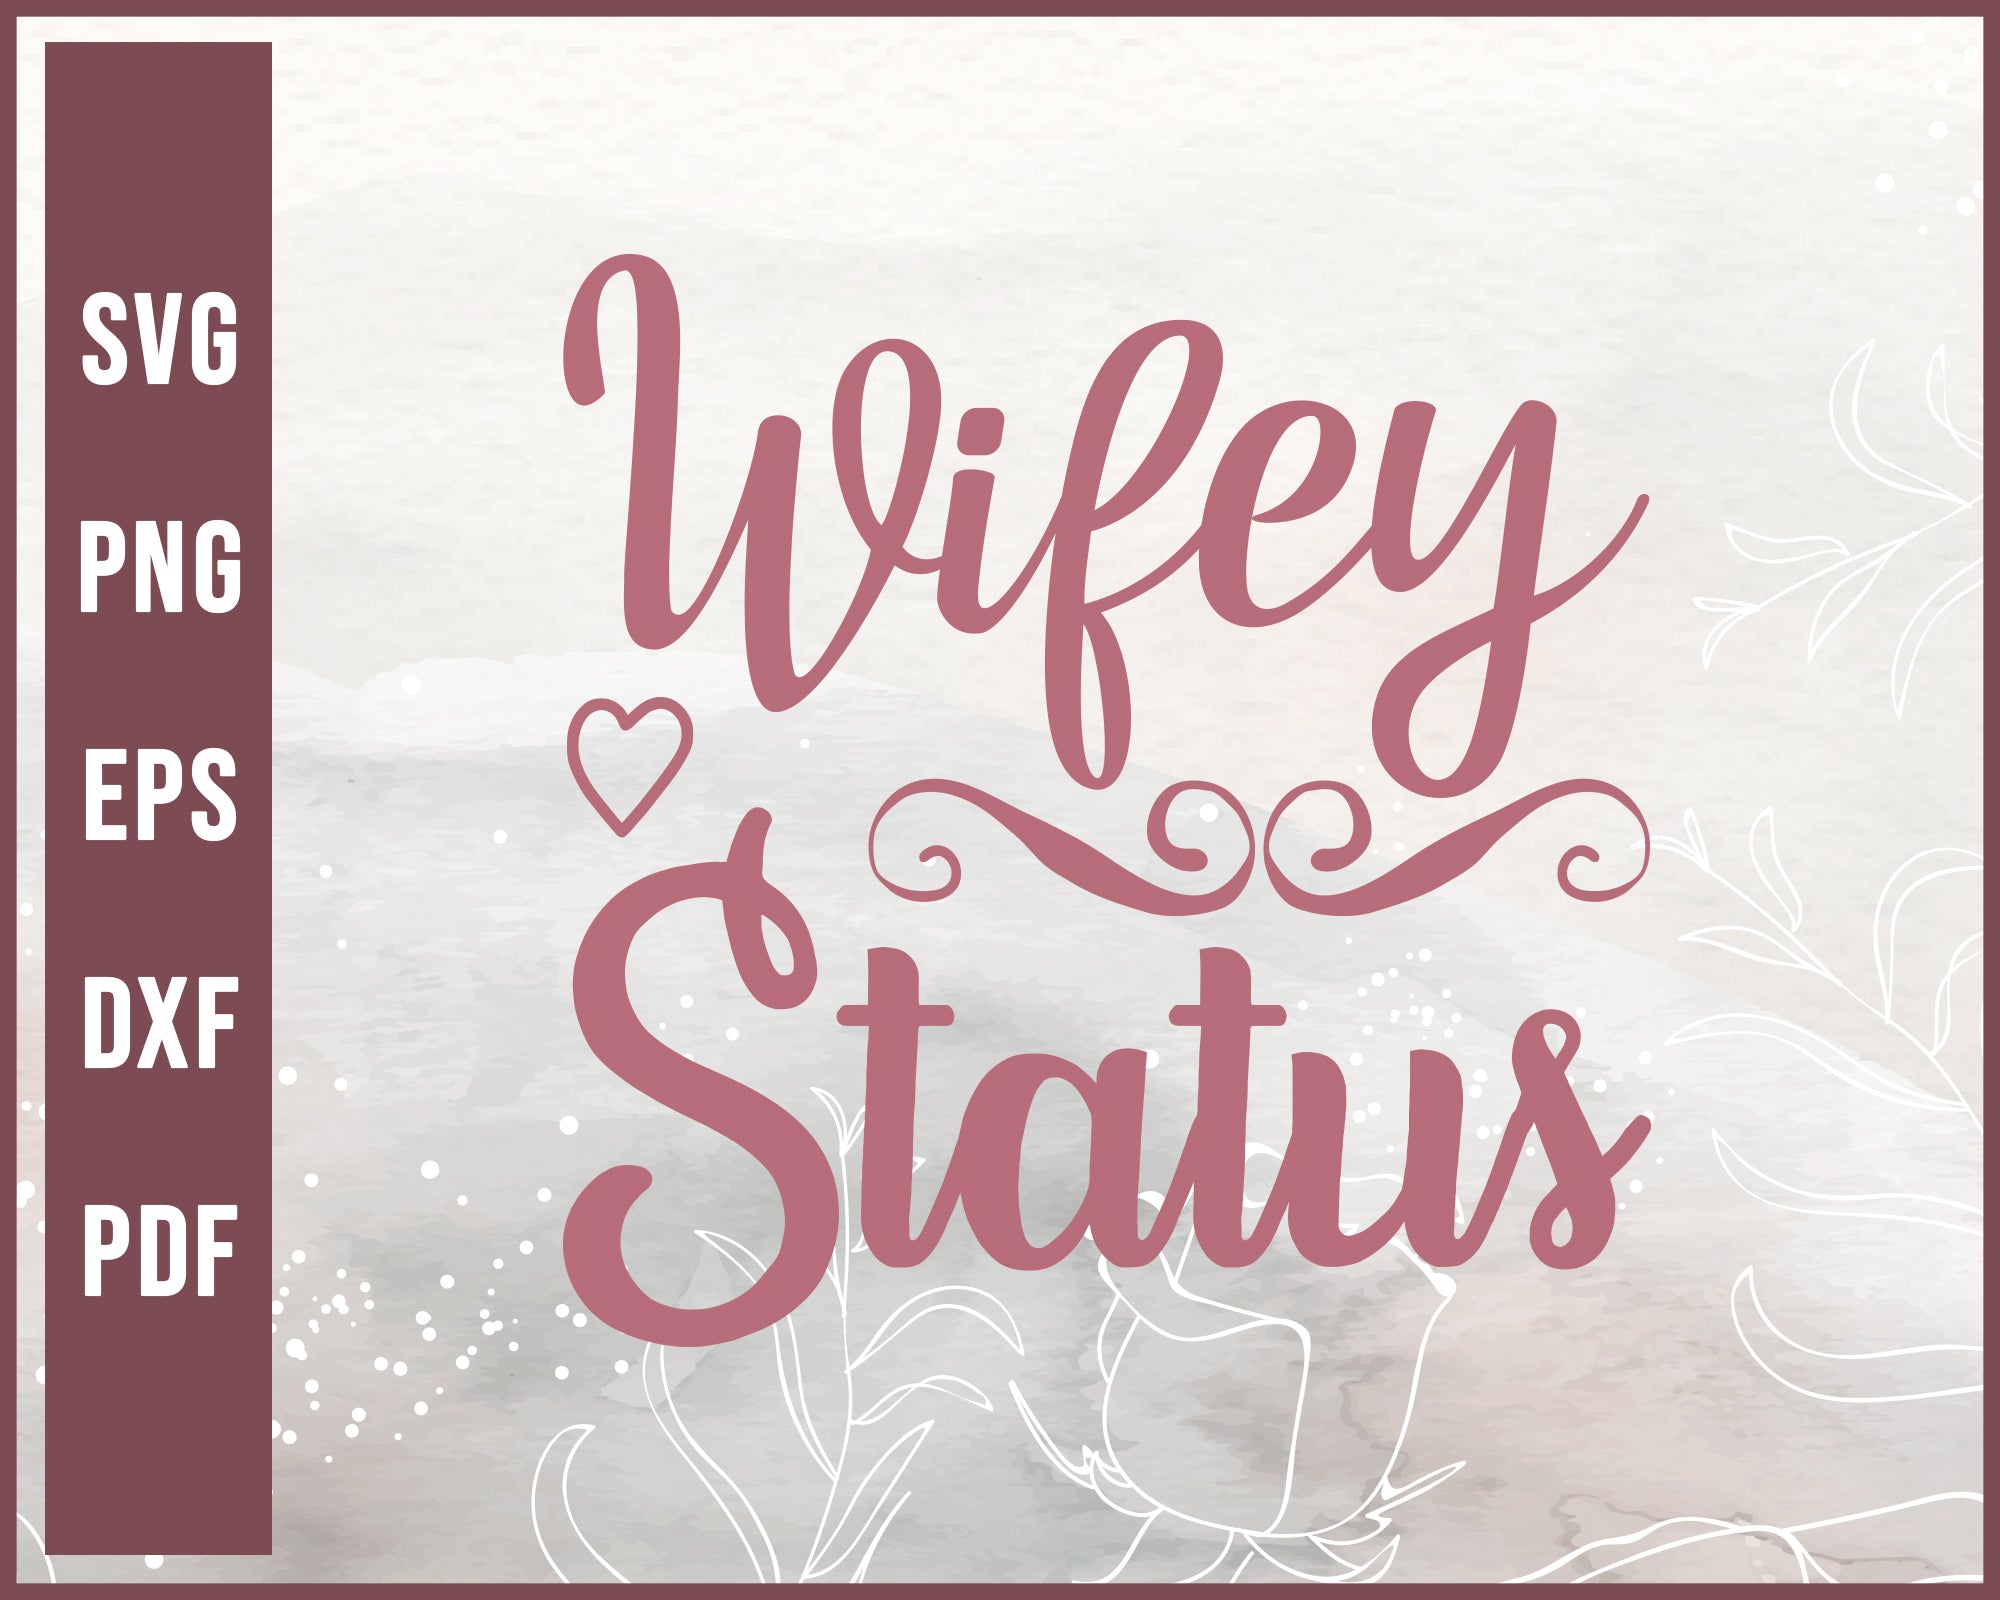 Wifey Status Wedding svg Designs For Cricut Silhouette And eps png Printable Files